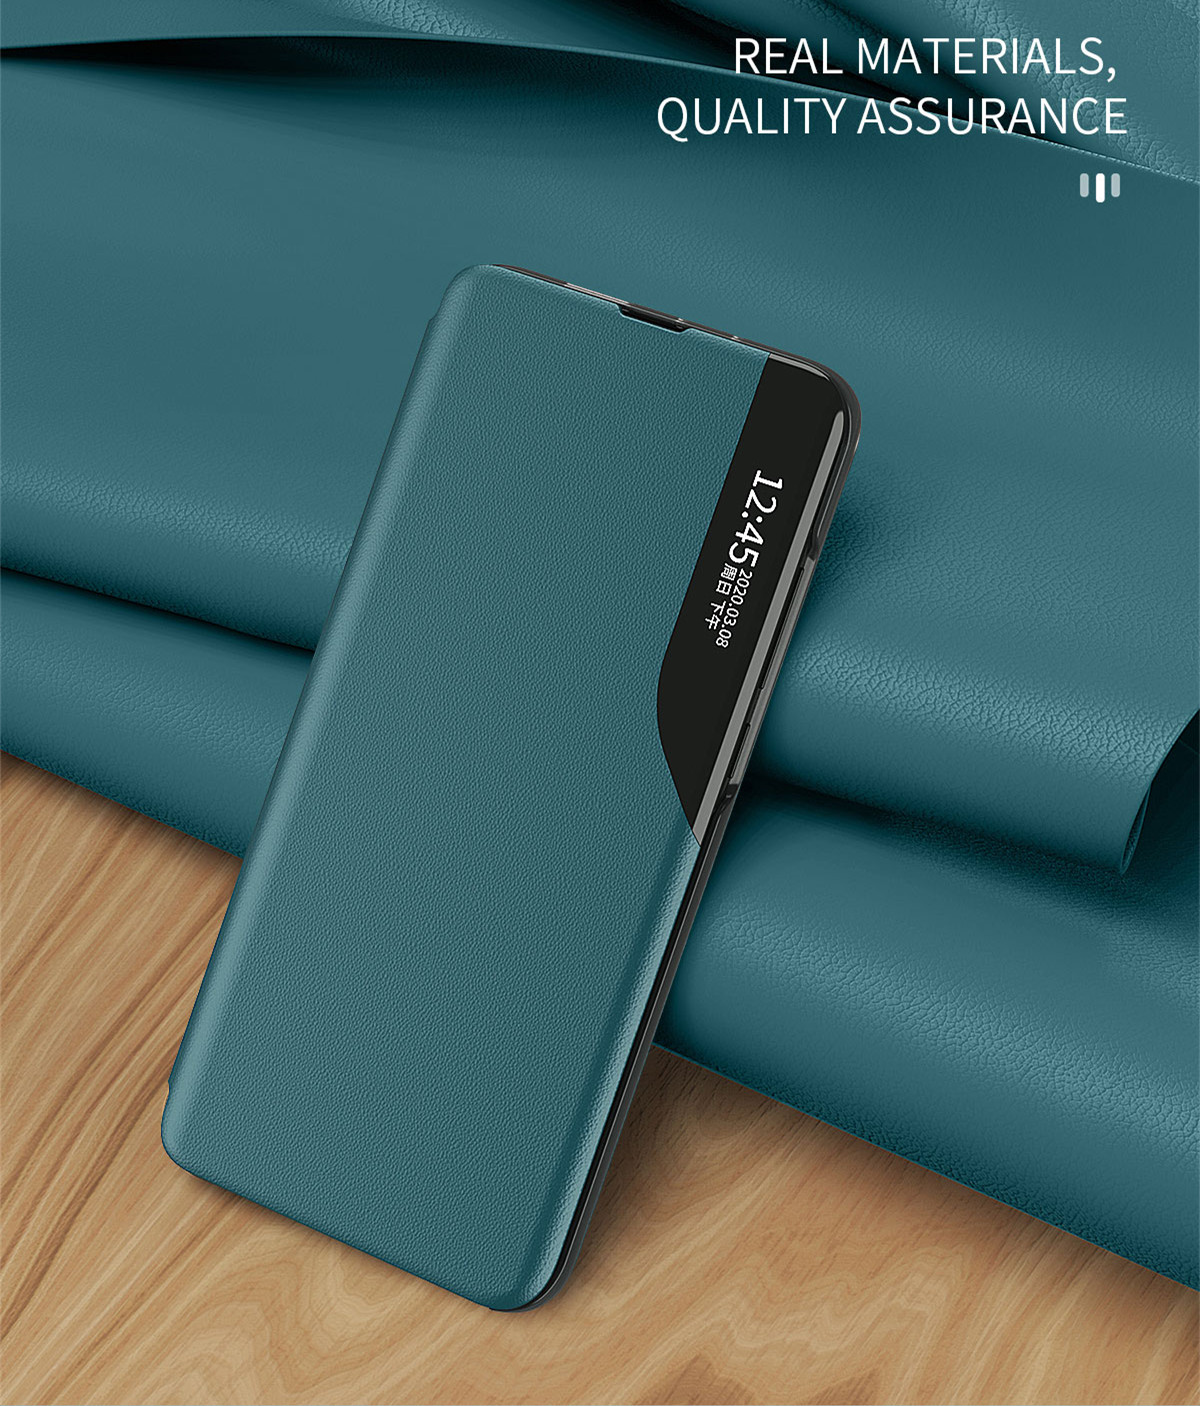 Bakeey-Magnetic-Flip-with-Stand-Shockproof-PU-Leather-Full-Cover-Protective-Cover-for-Xiaomi-Redmi-9-1742529-6